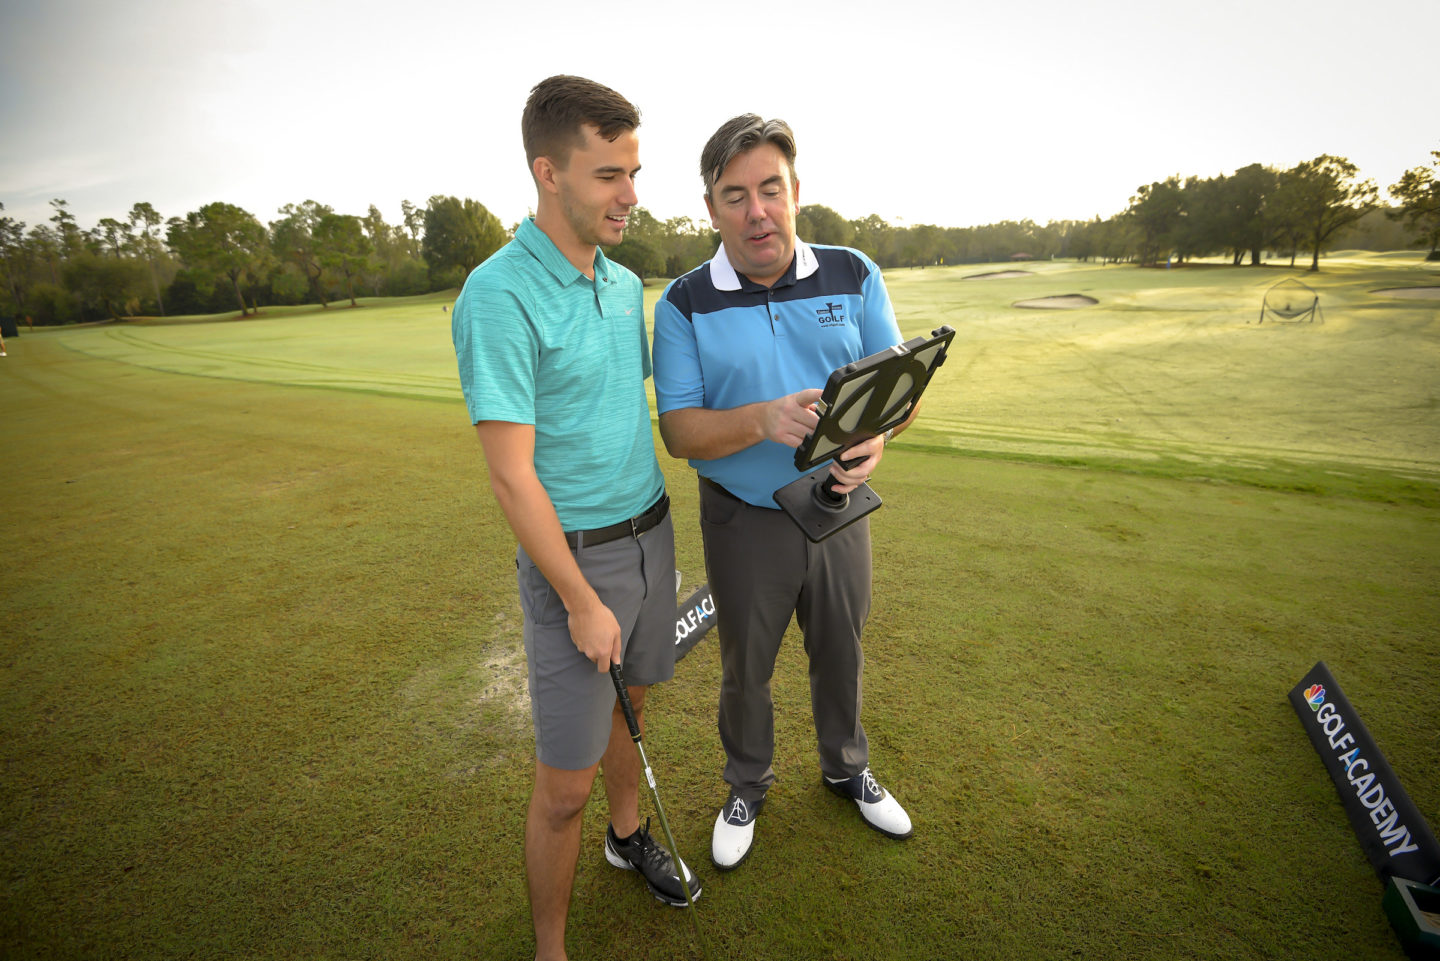 instructor teaching a golfer on the course